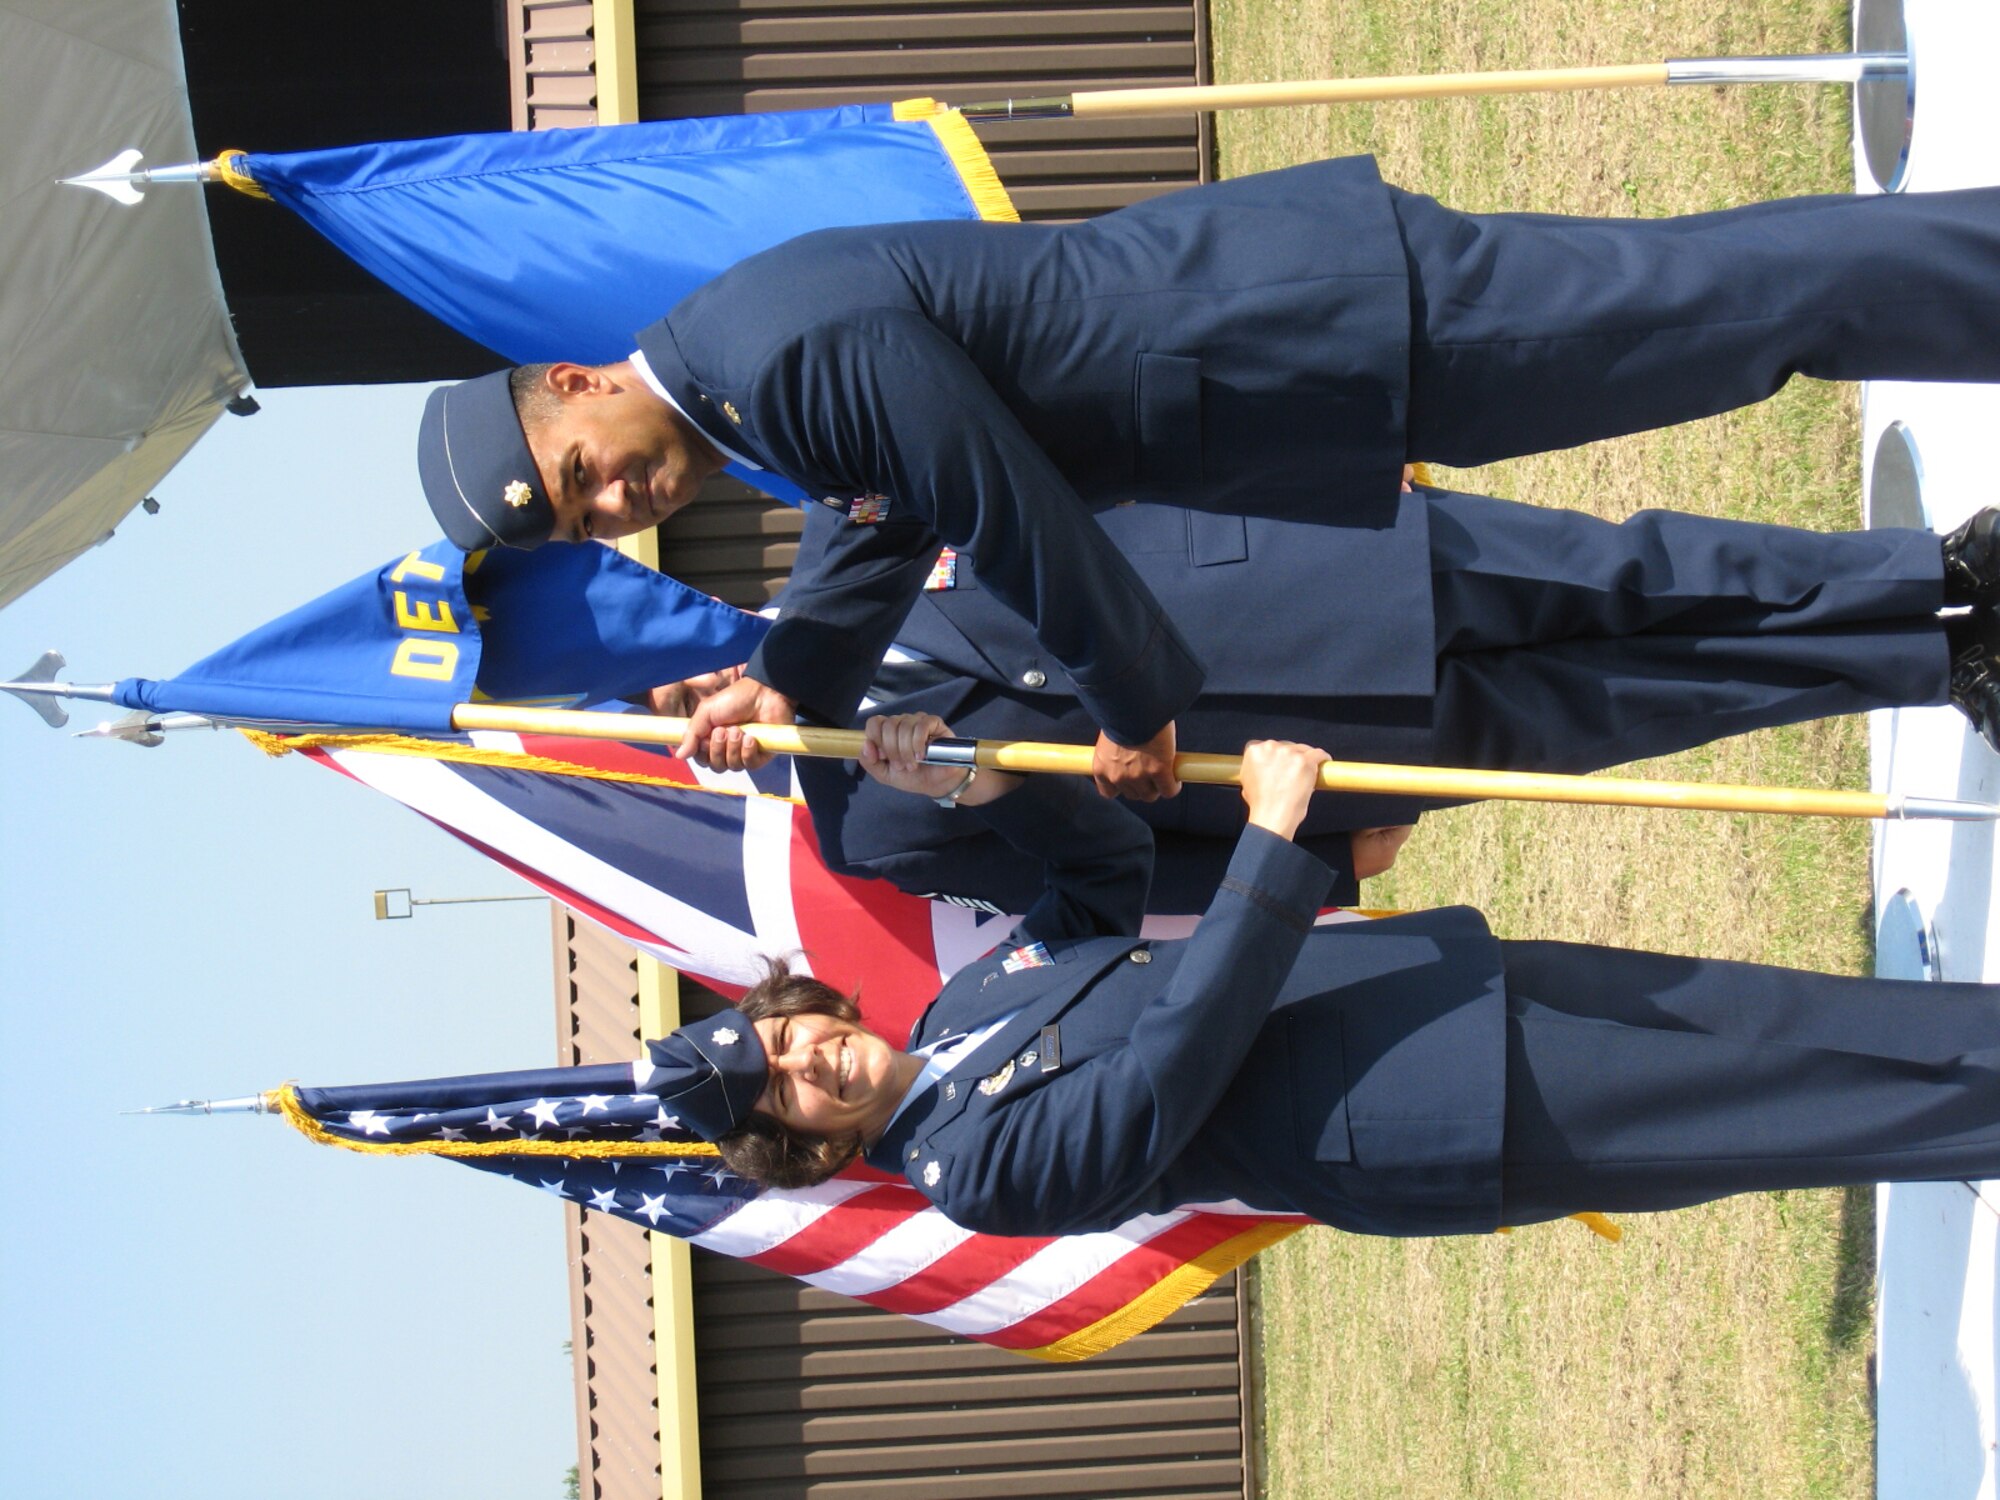 Lt. Col. Suzanne Streeter, 18th Intelligence Squadron Commander, passes the 18th Intelligence Squadron , Detachment 4 guidon to Maj. Brandon Beauchan as he assumes command at Royal Air Force Fetlwell, England July 2, 2009. (USAF photo by SSgt. Darryl Hambly) 